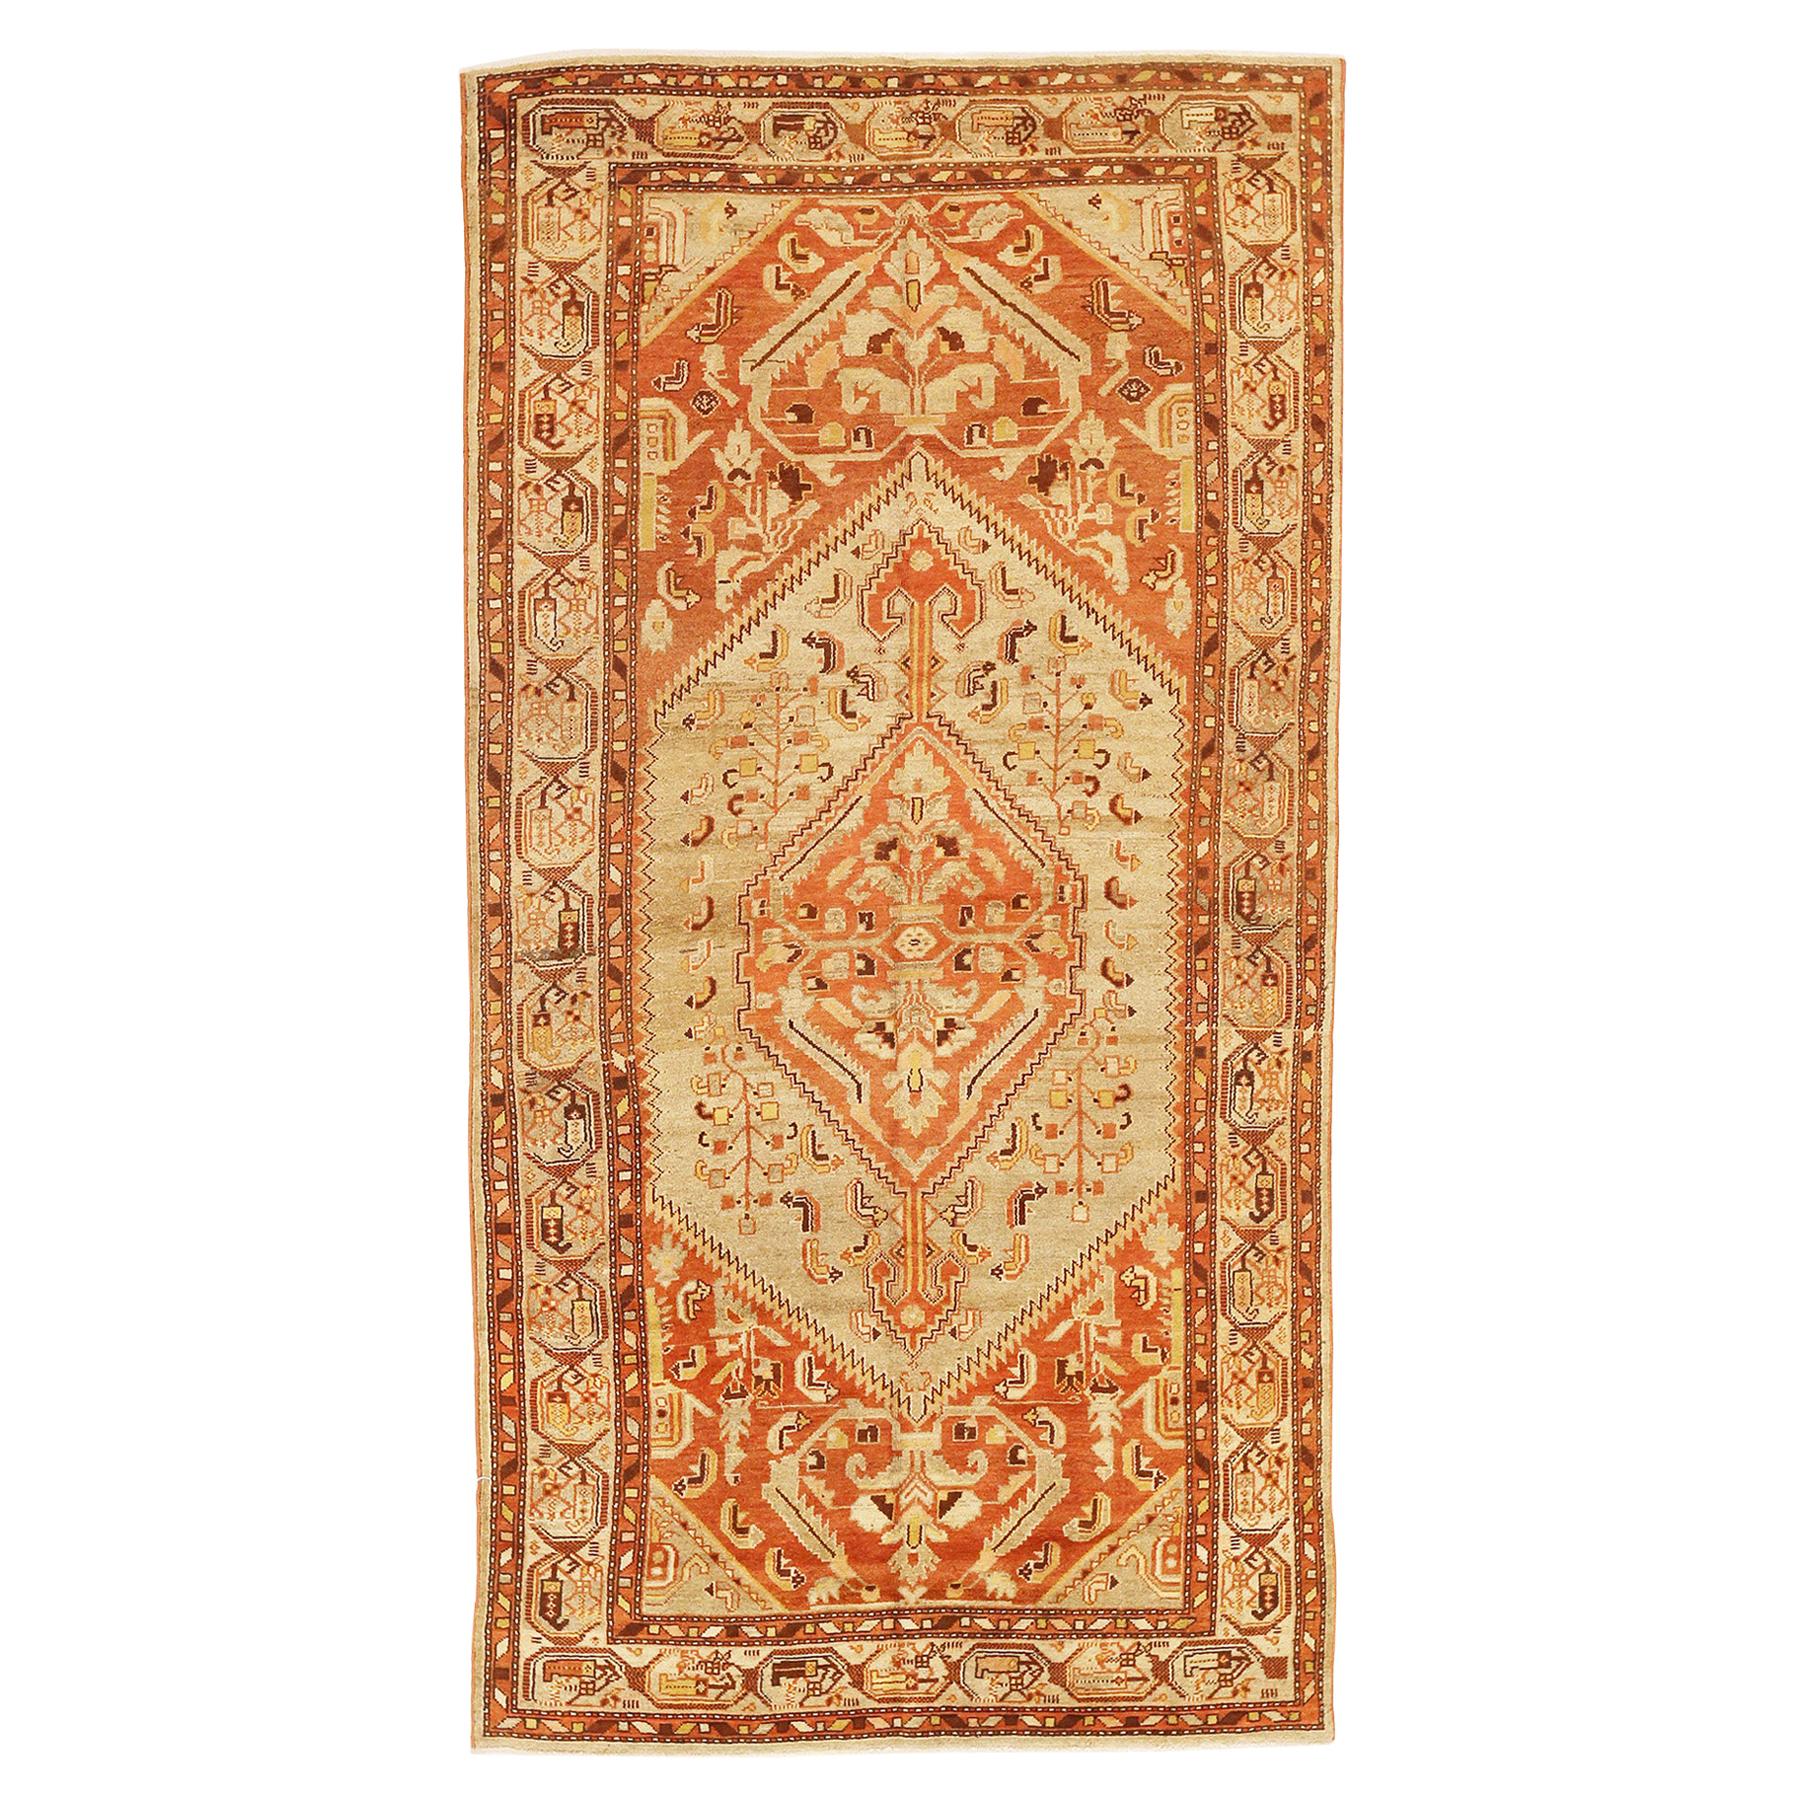 Antique Persian Khamseh Rug with Brown and Ivory Tribal Details on Orange Field